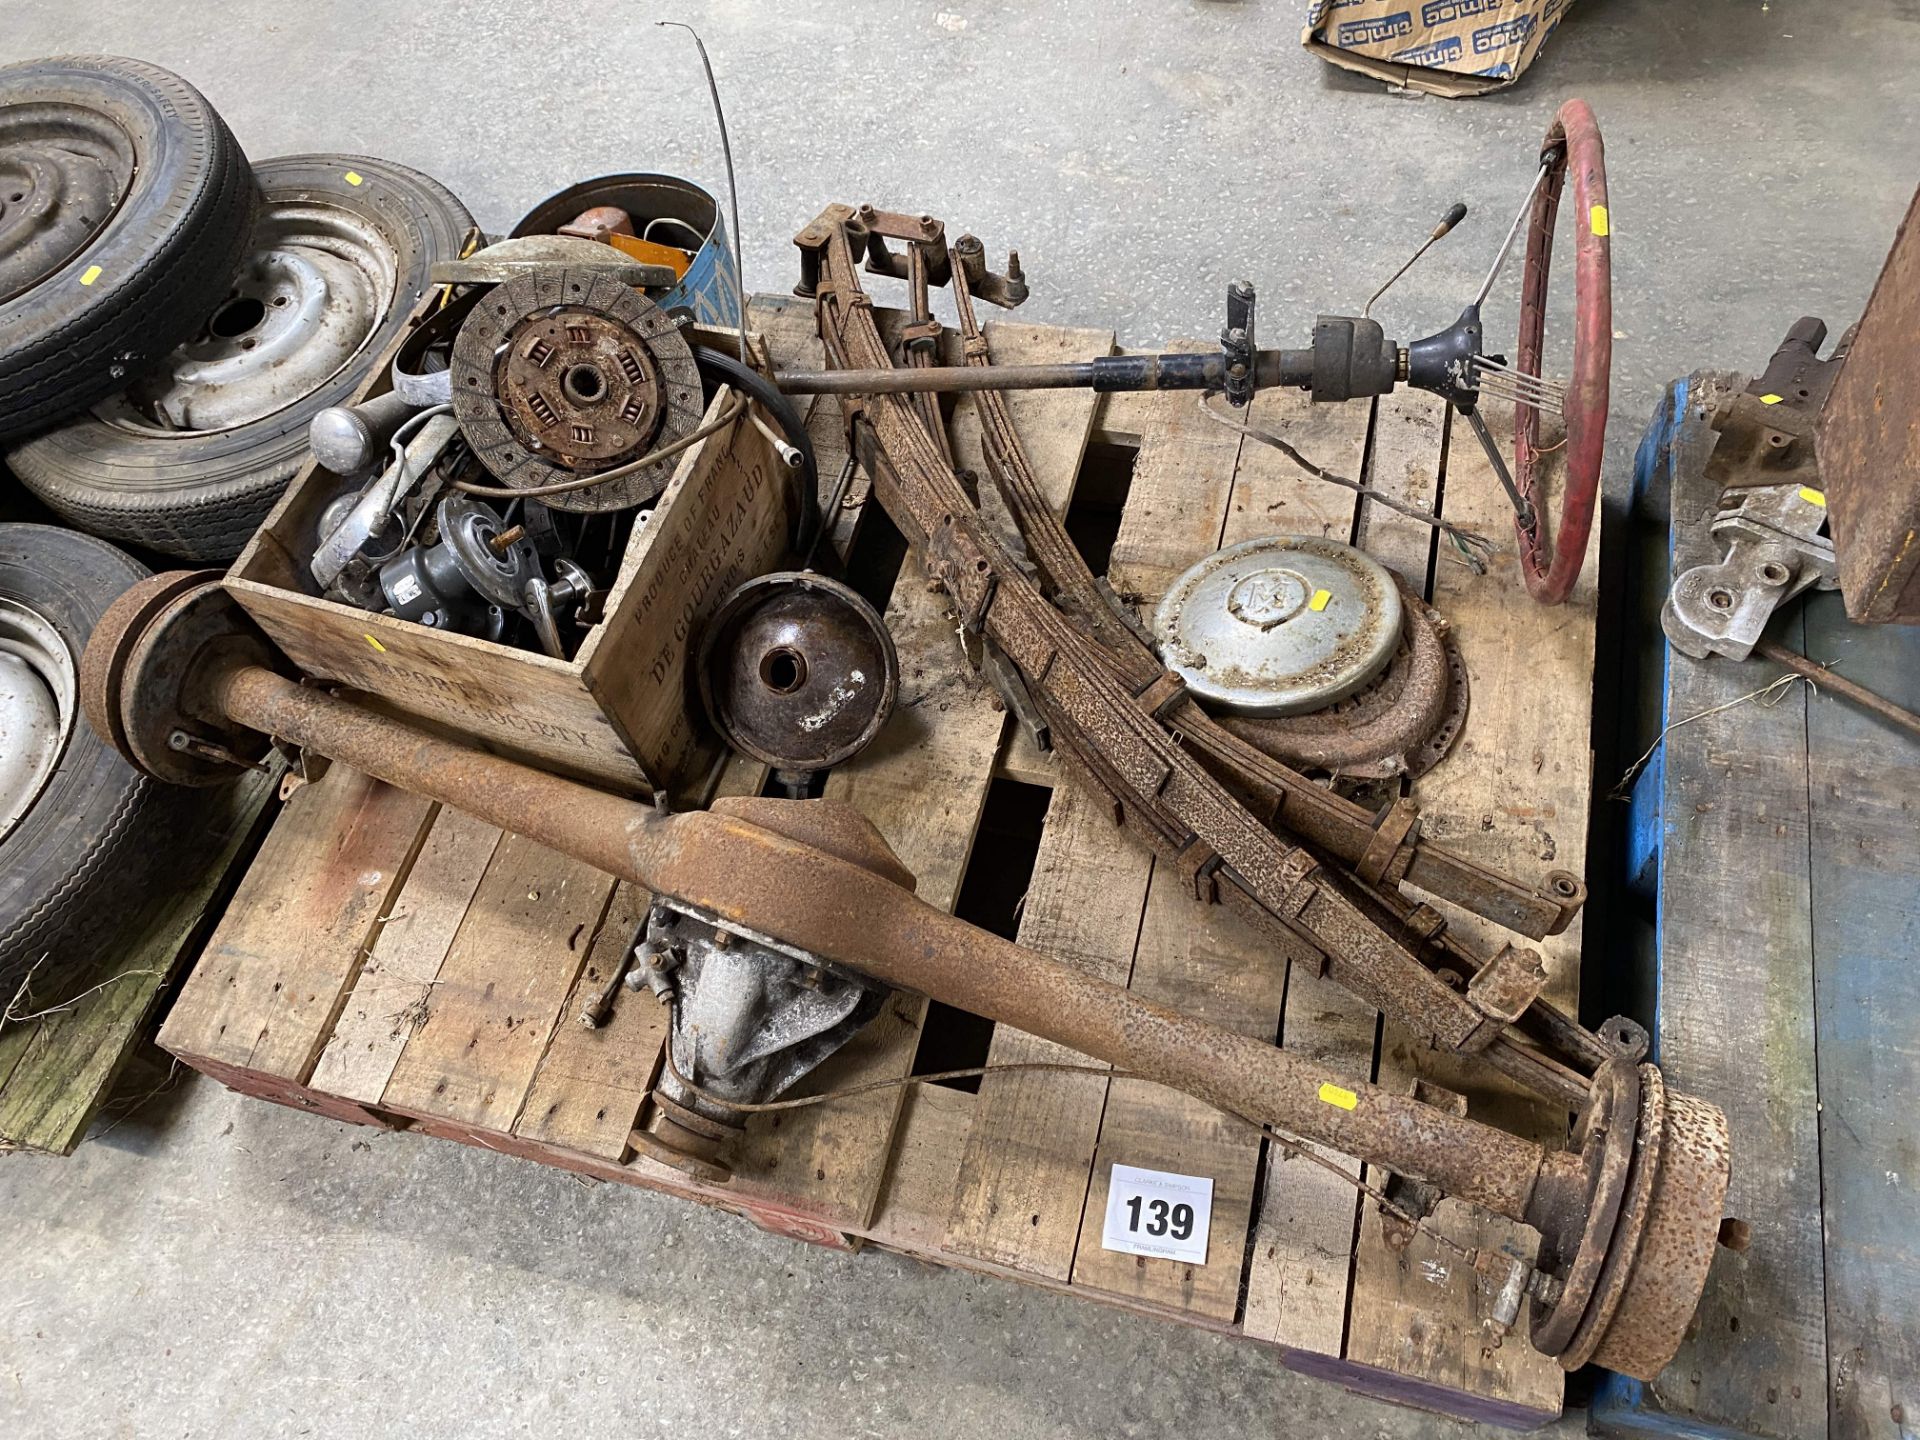 Morris Minor rear axle, clutch, springs, wheels and tyres and various spares. - Image 2 of 5